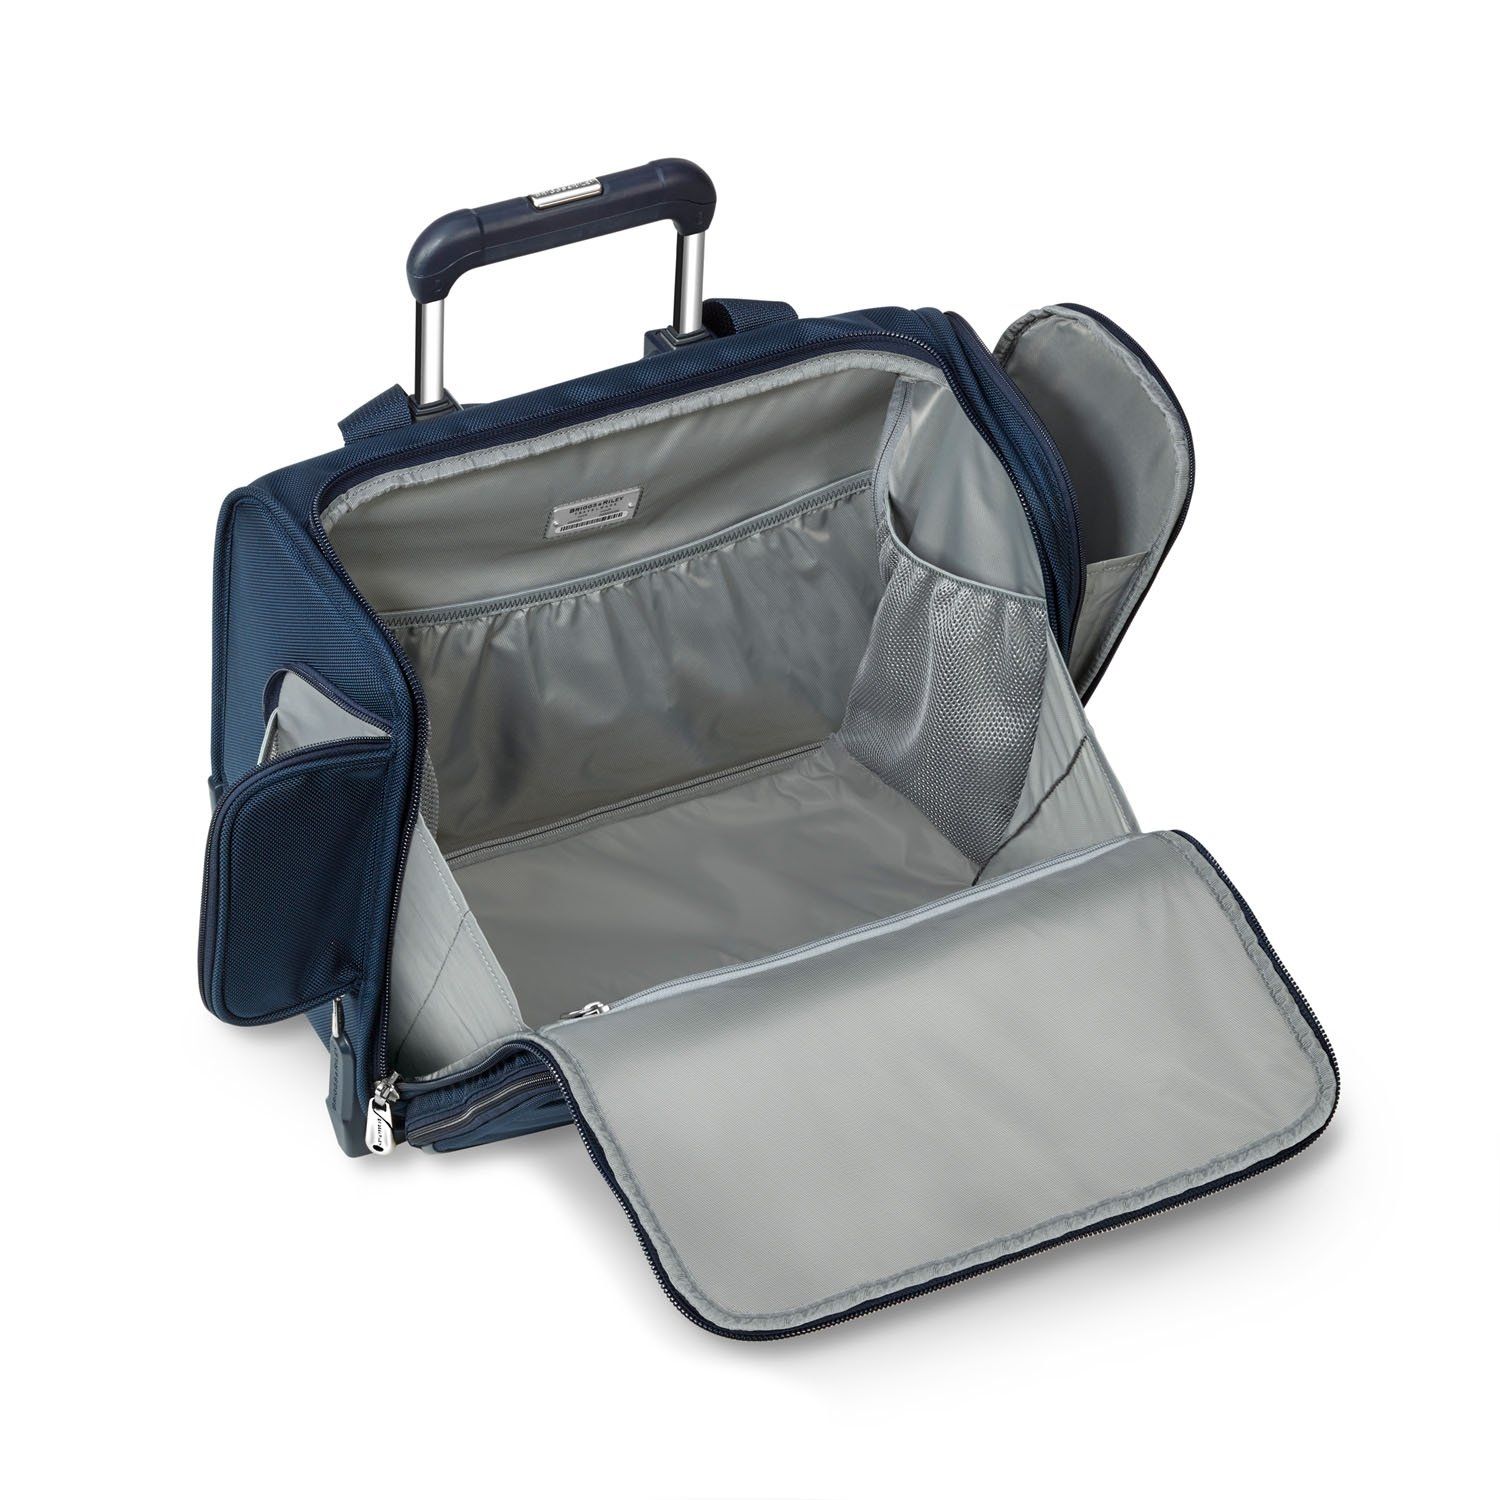 The ideal luggage to carry on board, this wheeled cabin bag keeps you organised with every turn. Fits under most airline seats as well as in the overhead compartment. Key features include: Padded pocket for iPad®. Roomy, gusseted main compartment allows bag to be easily packed and organised. Three elastic mesh pockets provide additional organisation for smaller items like belts and other accessories. Interlocking handle system allows bag to stack and stay secure on top of other Briggs & Riley Baseline Uprights®. Outsider® handle provides greater interior capacity and a flat interior surface for packing so clothing arrives wrinkle-free. Side water bottle zipper pocket for easy access to beverage.